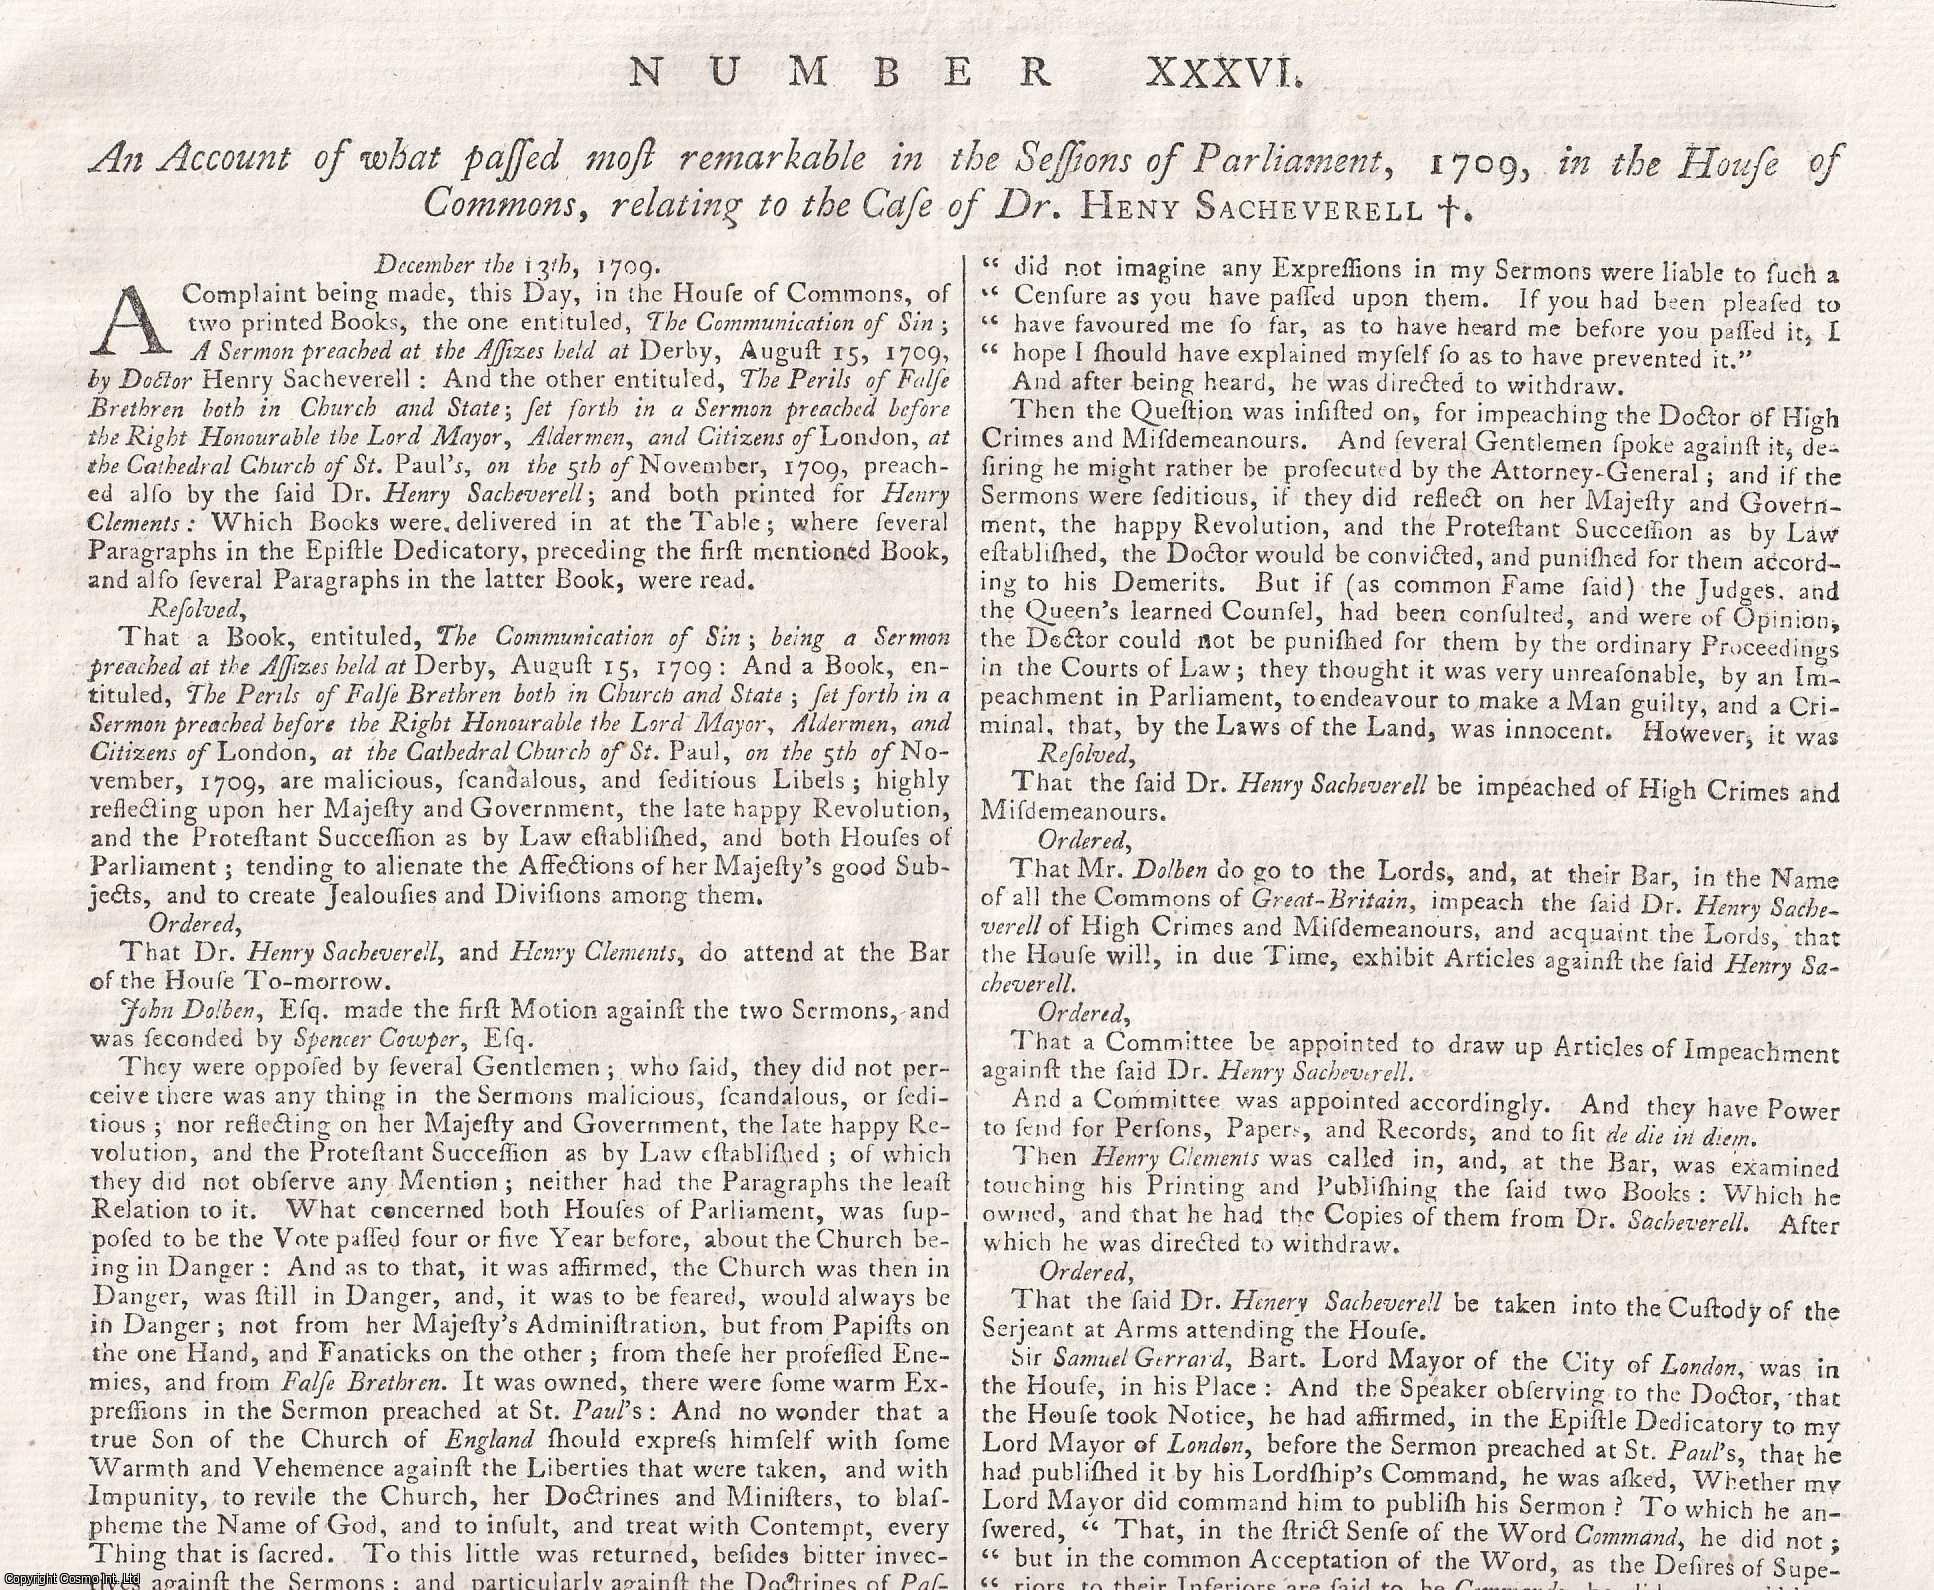 [Trial] - ATTACK ON DISSENTERS. An Account of what passed most remarkable in the Sessions of Parliament, 1709, in the House of Commons, relating to the Case of Dr. Henry Sacheverell. An original article from the Collected State Trials.